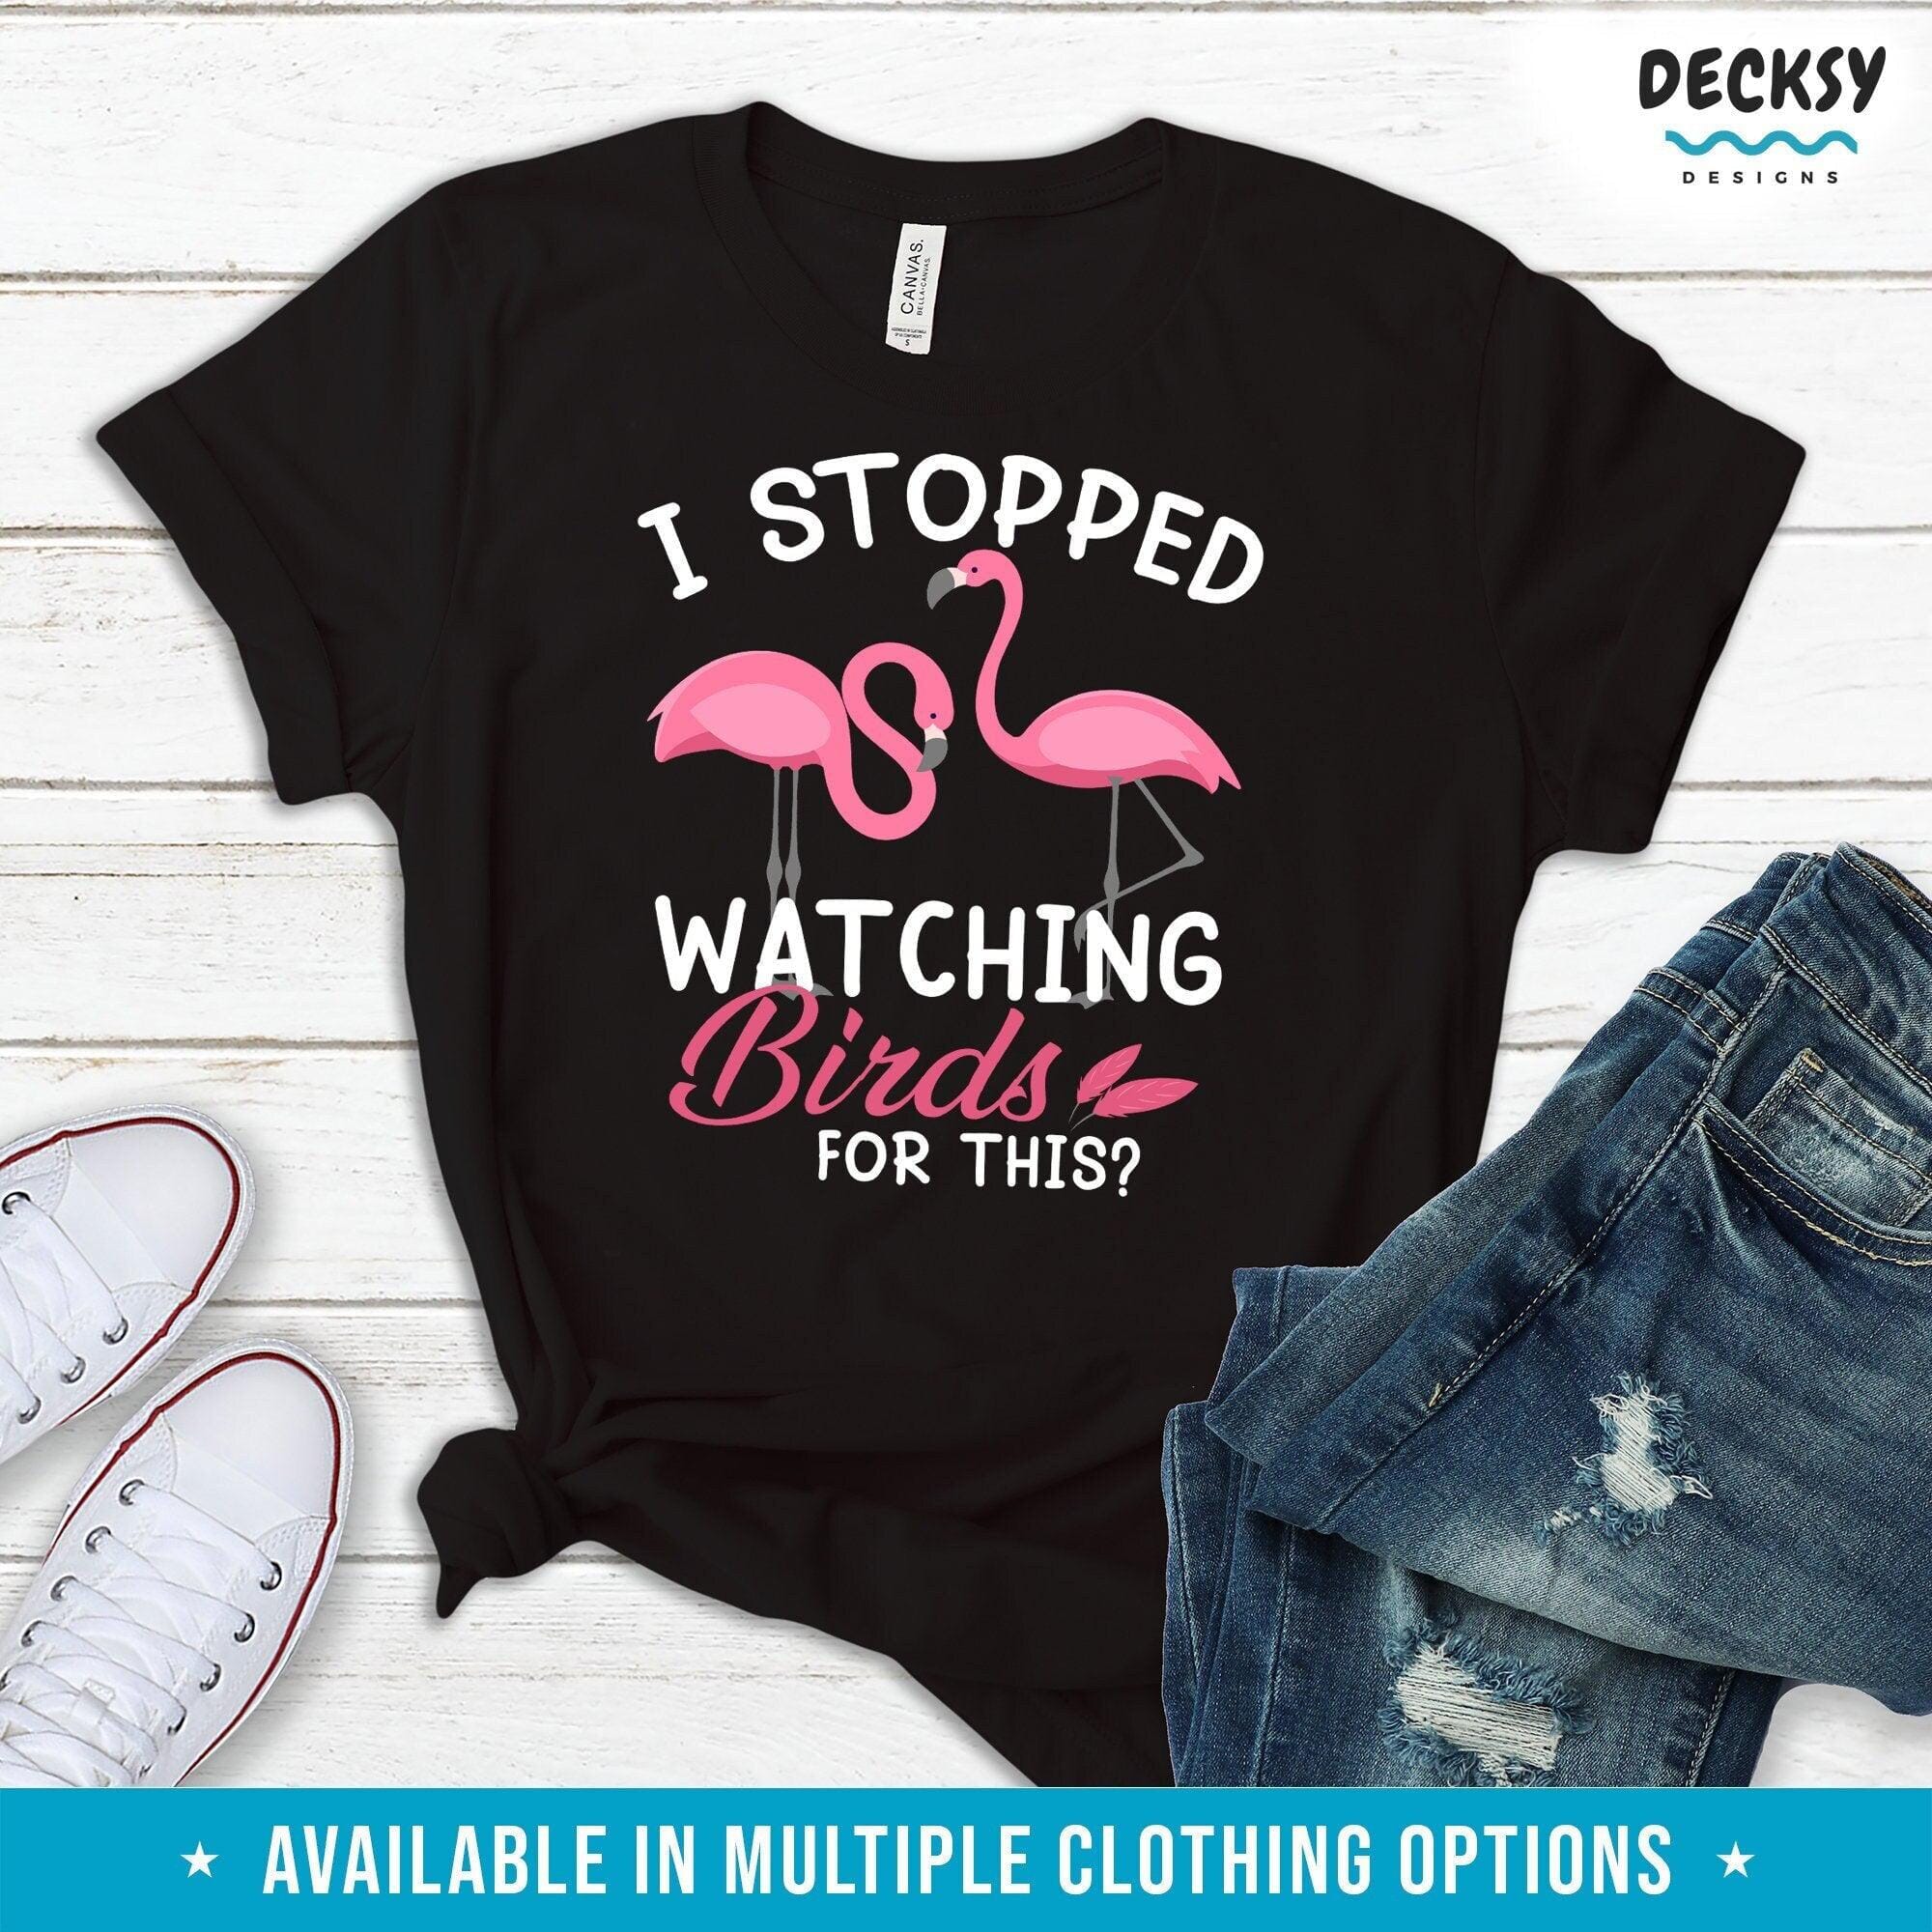 Funny Bird Shirt, Birdwatching Gift-Clothing:Gender-Neutral Adult Clothing:Tops & Tees:T-shirts:Graphic Tees-DecksyDesigns